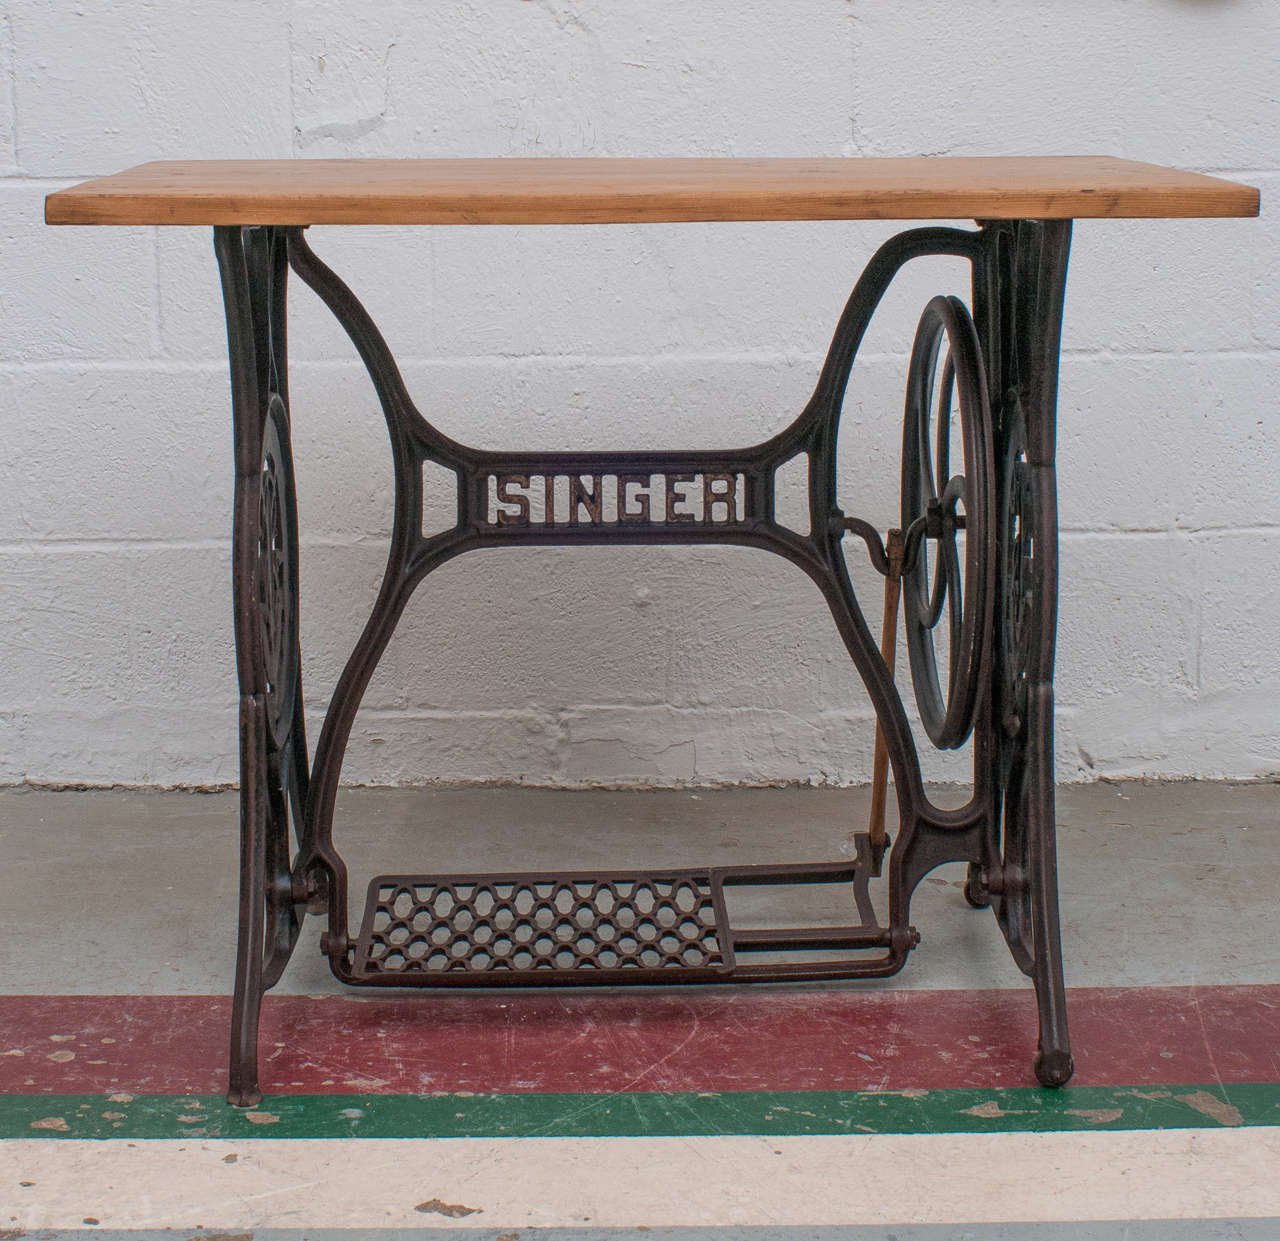 sewing machine tables for sale